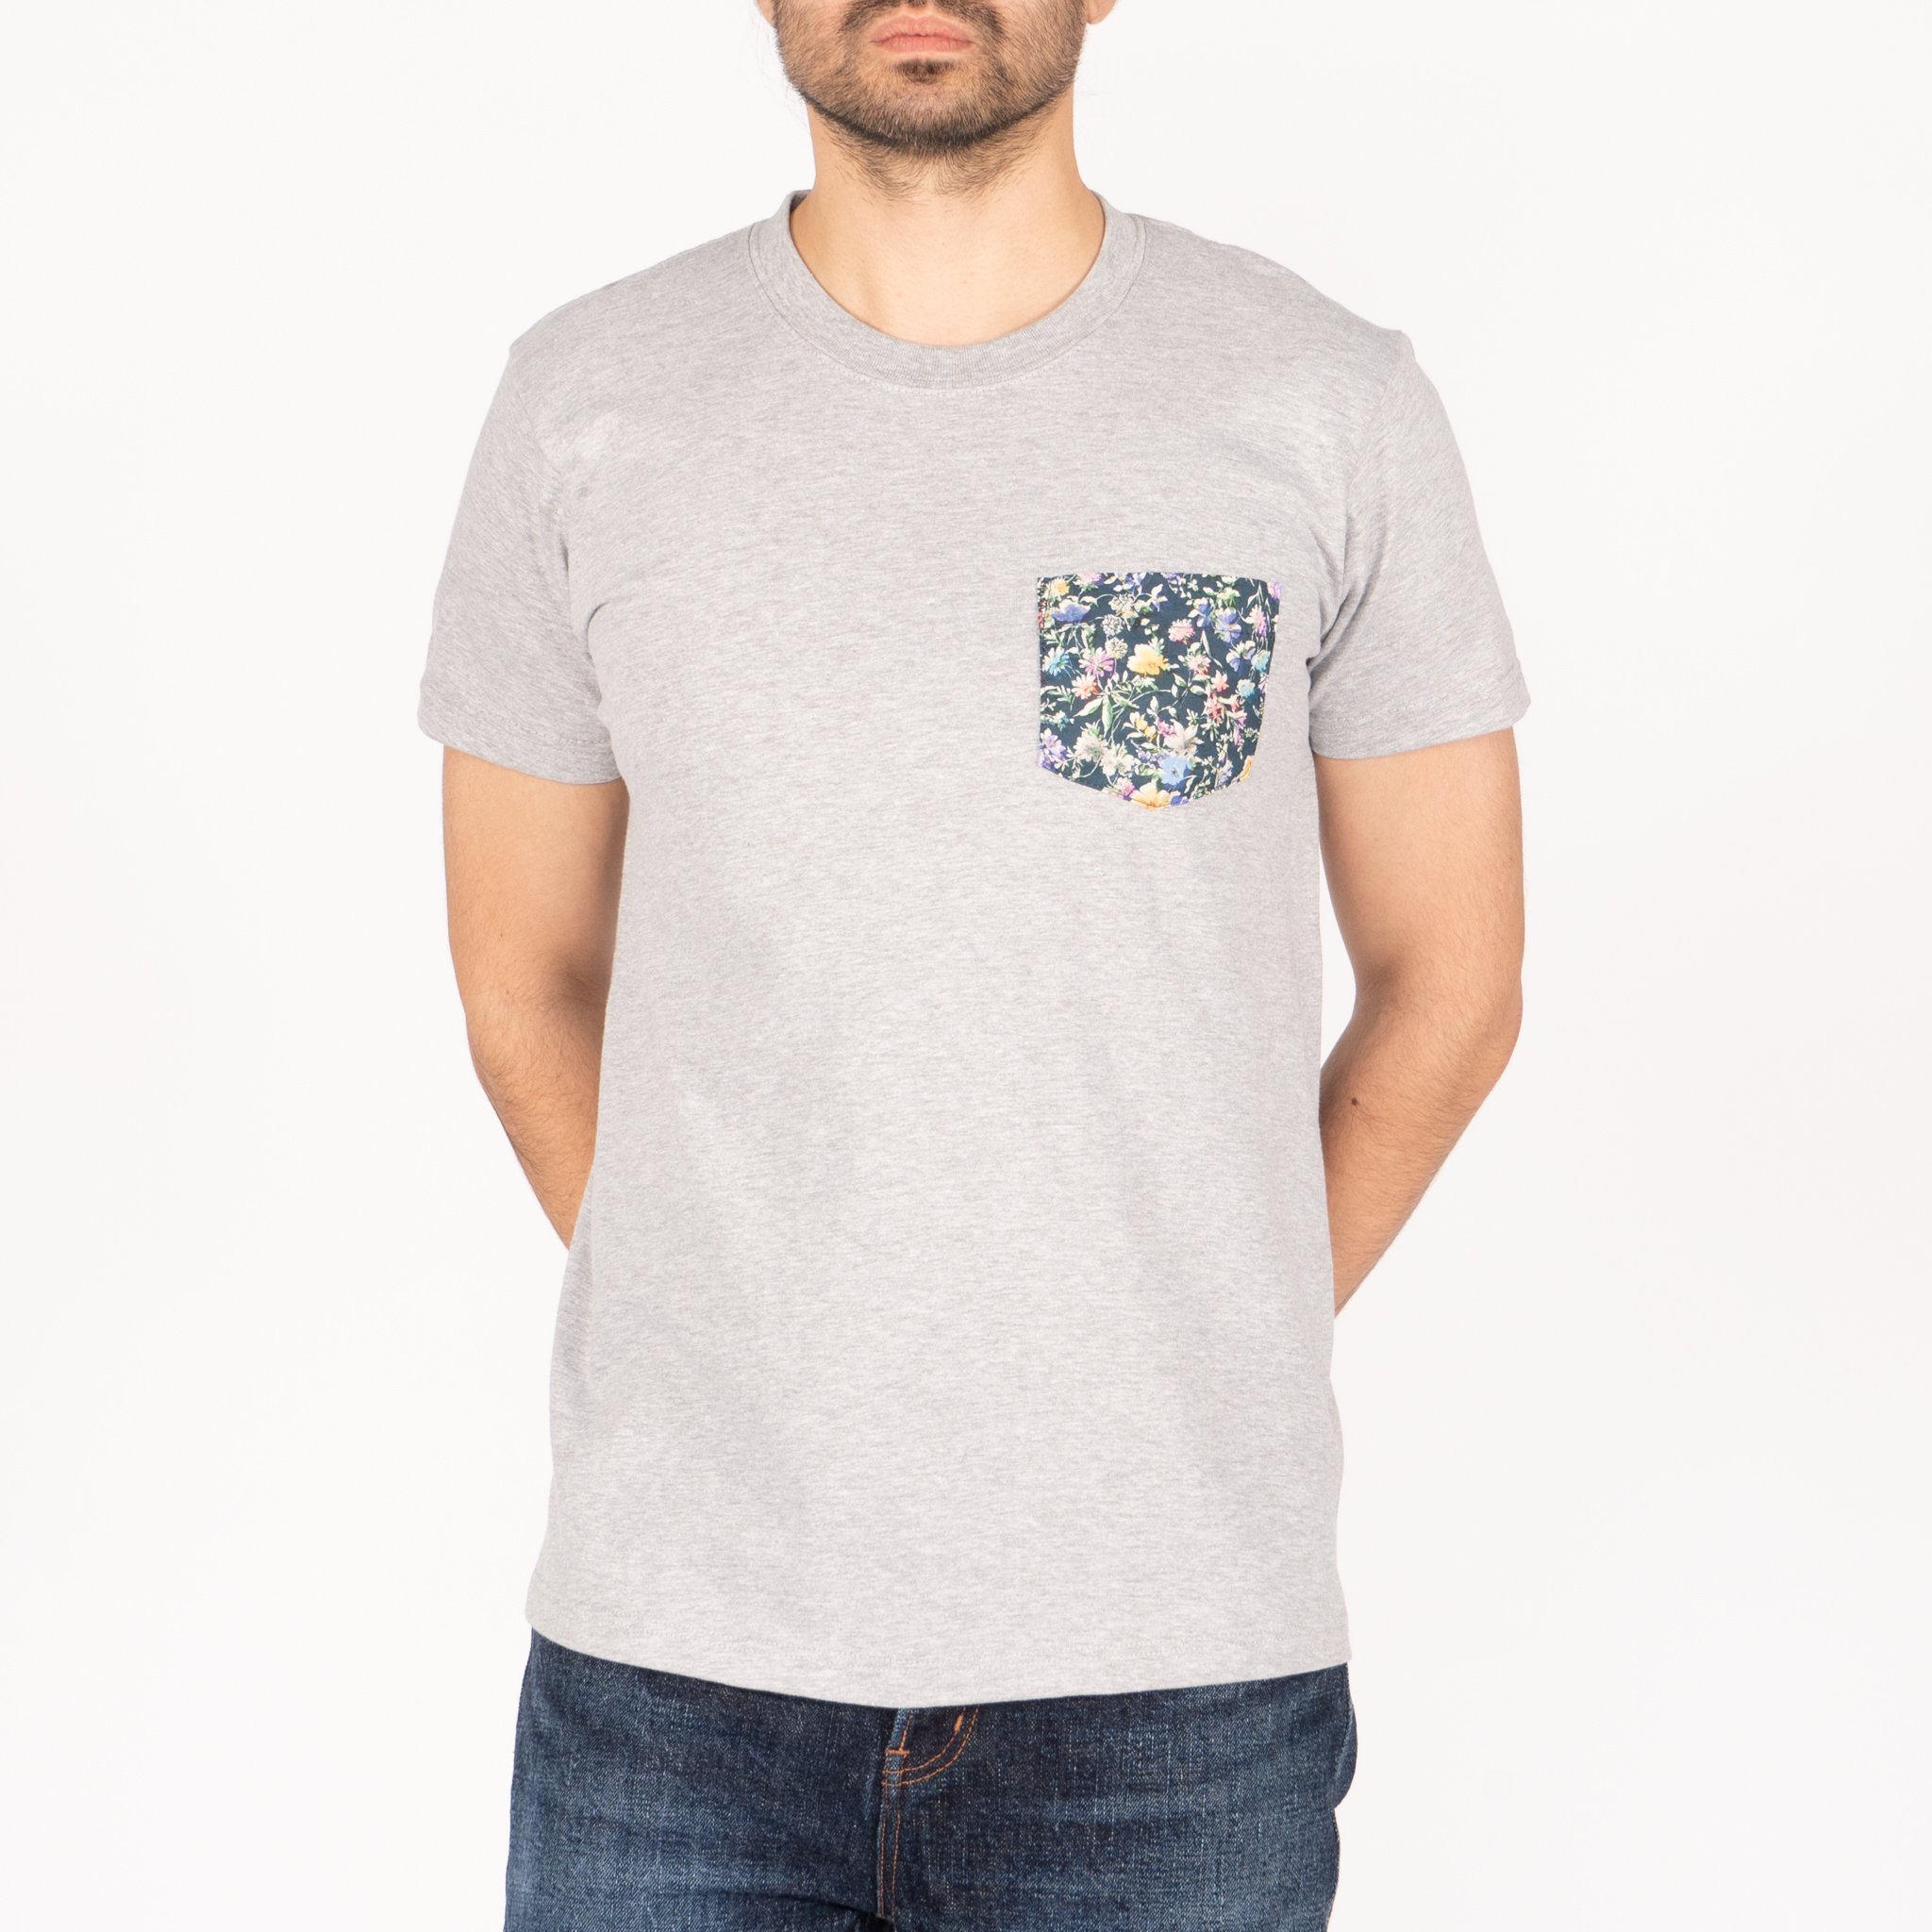 Contrast Pocket Tee - Heather Grey - SS23 | Naked & Famous Denim